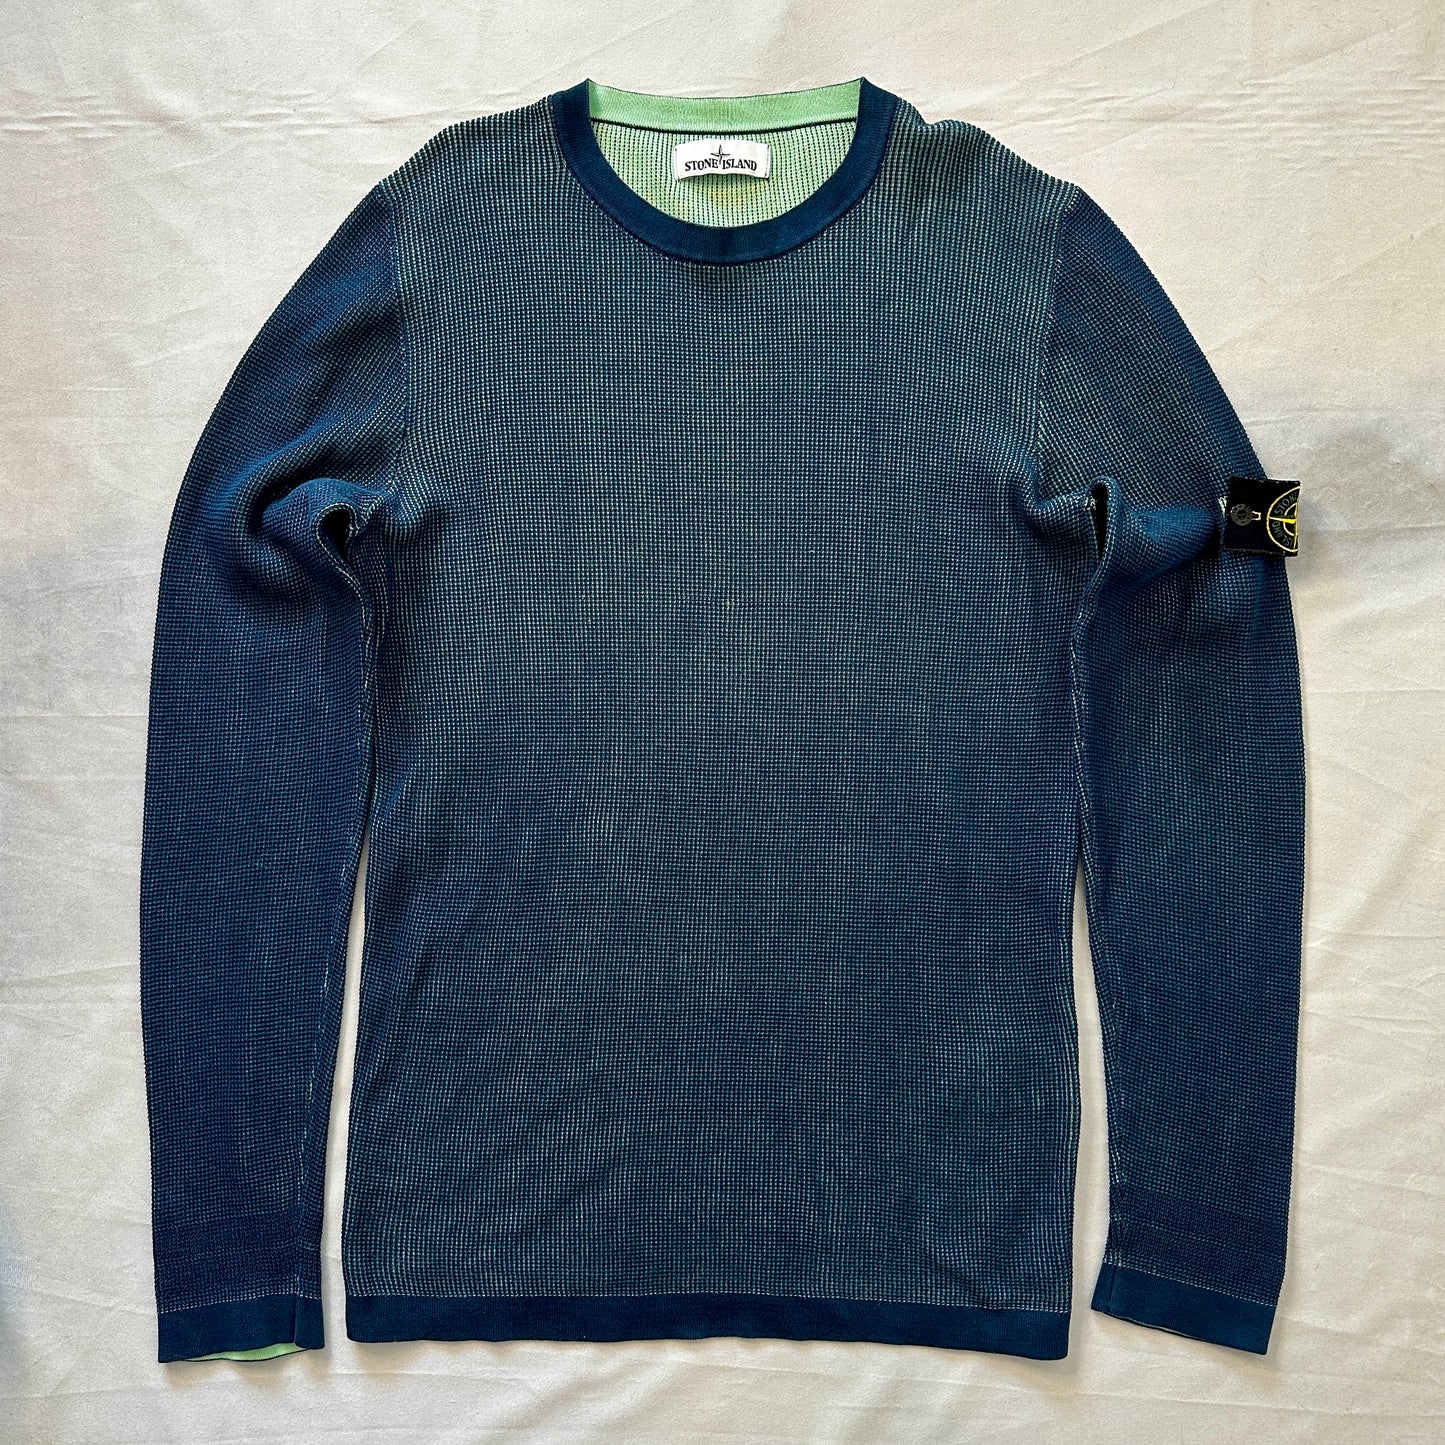 Stone Island 2018 Two-Tone Waffle Cotton Knit Crewneck Sweater - L - Made in Italy